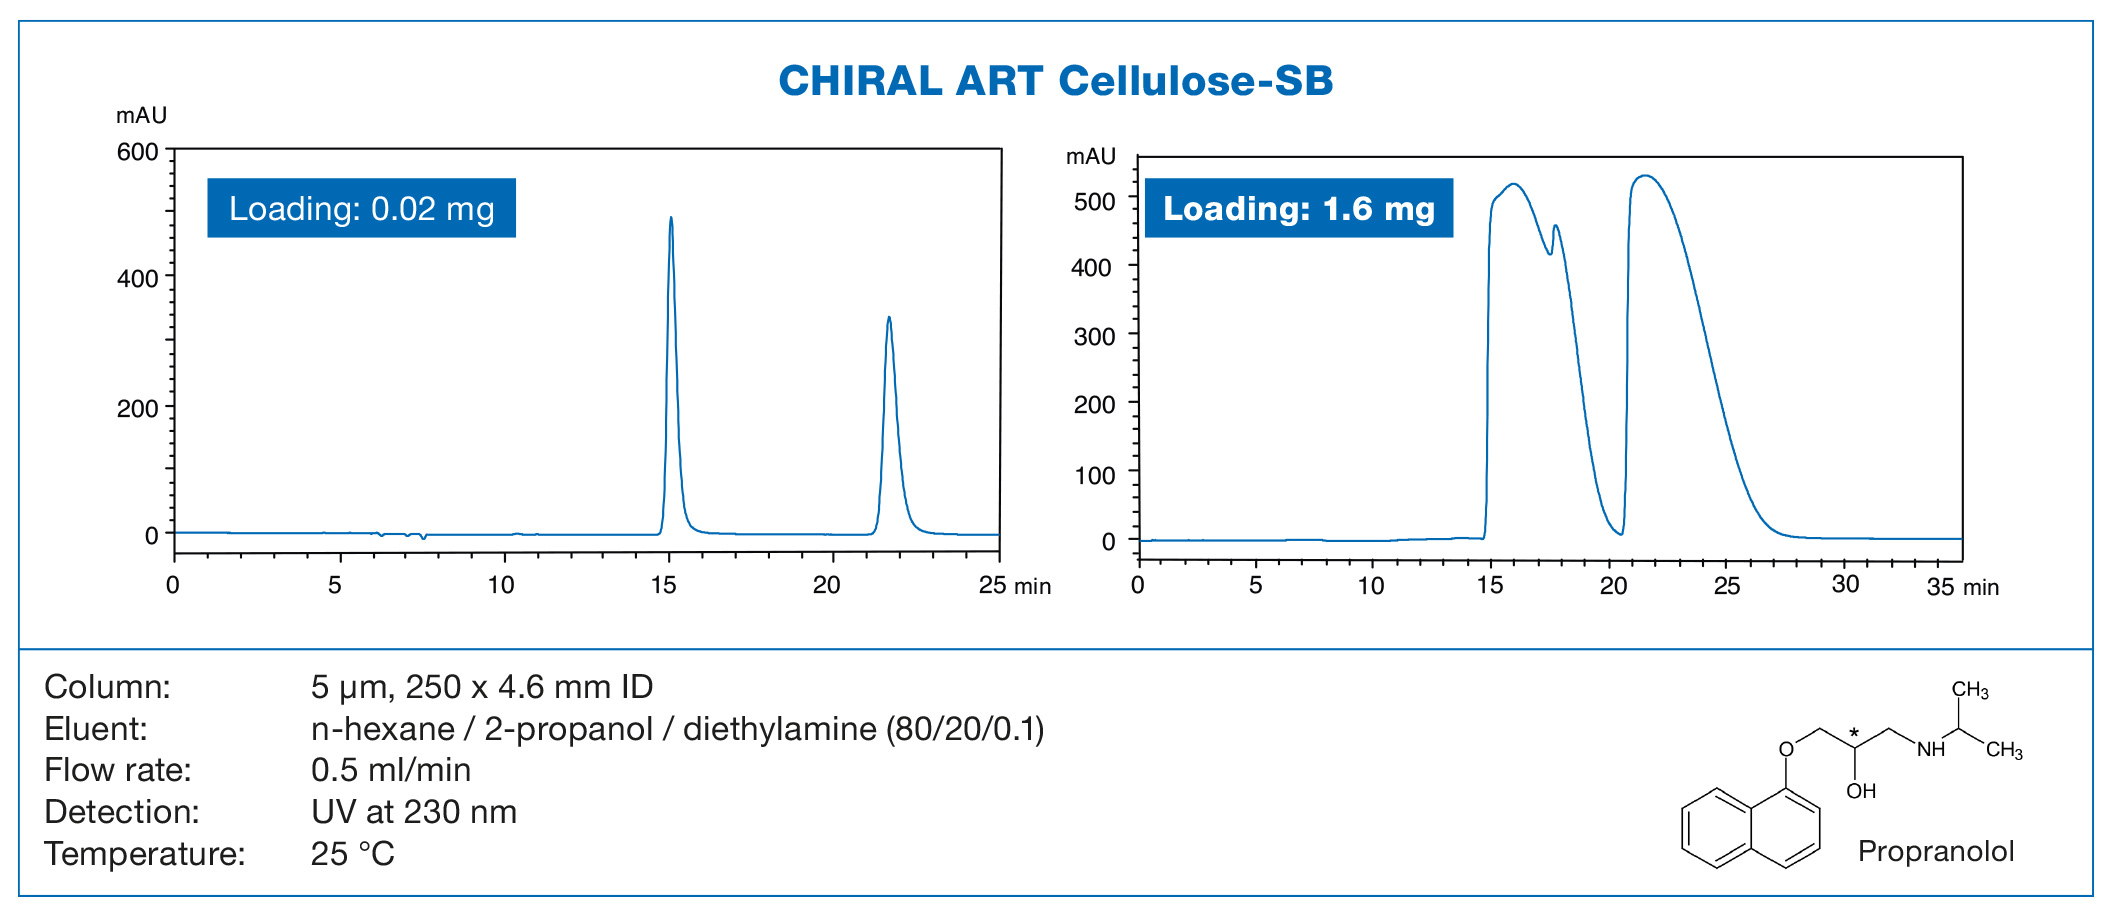 The image shows the purification of the enantiomers of propranolol with the chiral stationary phase CHIRAL ART Cellulose-SB by YMC and an alternative material with analytical and preparative loading amounts